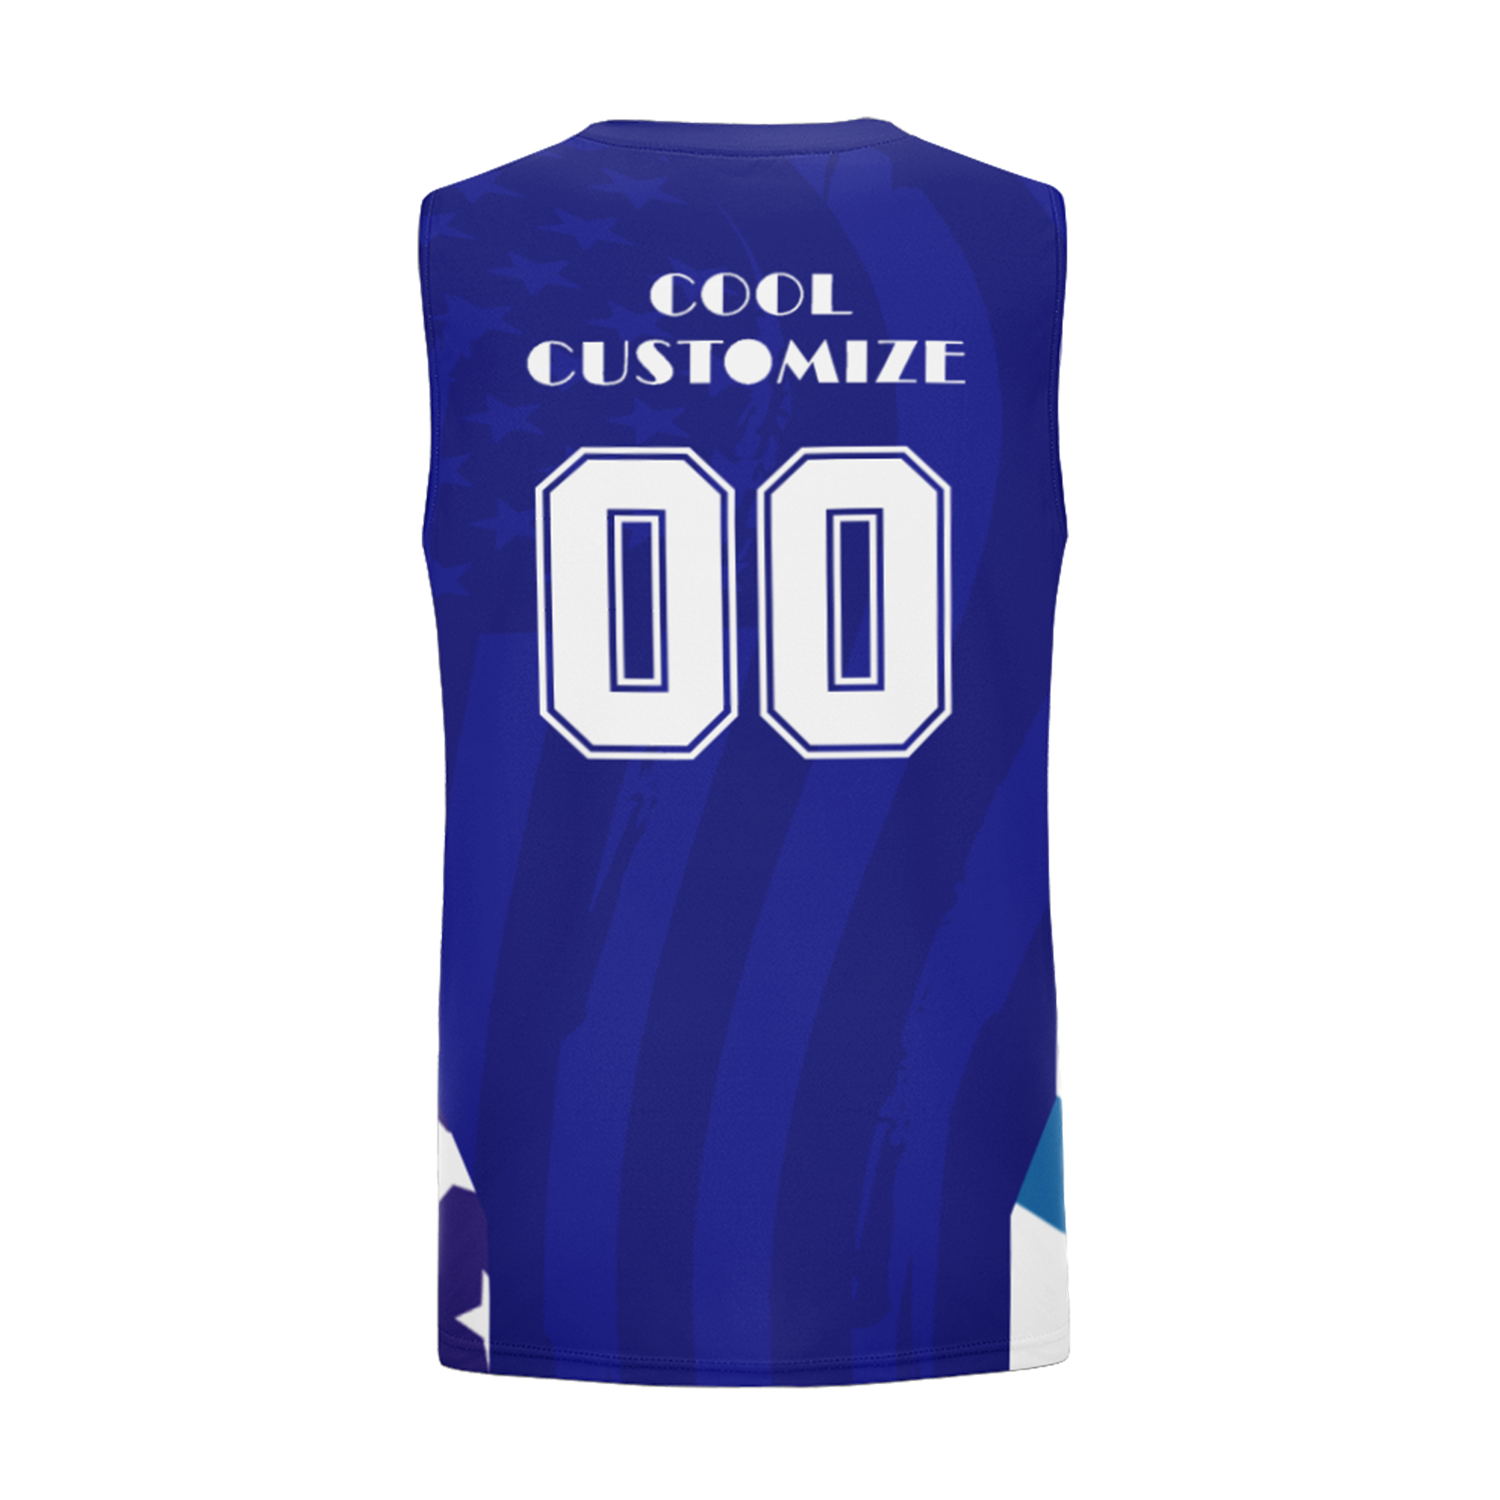 cool-customize-oem-5.3oz-pinhole-mesh-basketball-uniforms-top-quality-personalized-design-basketball-jersey-suits-6